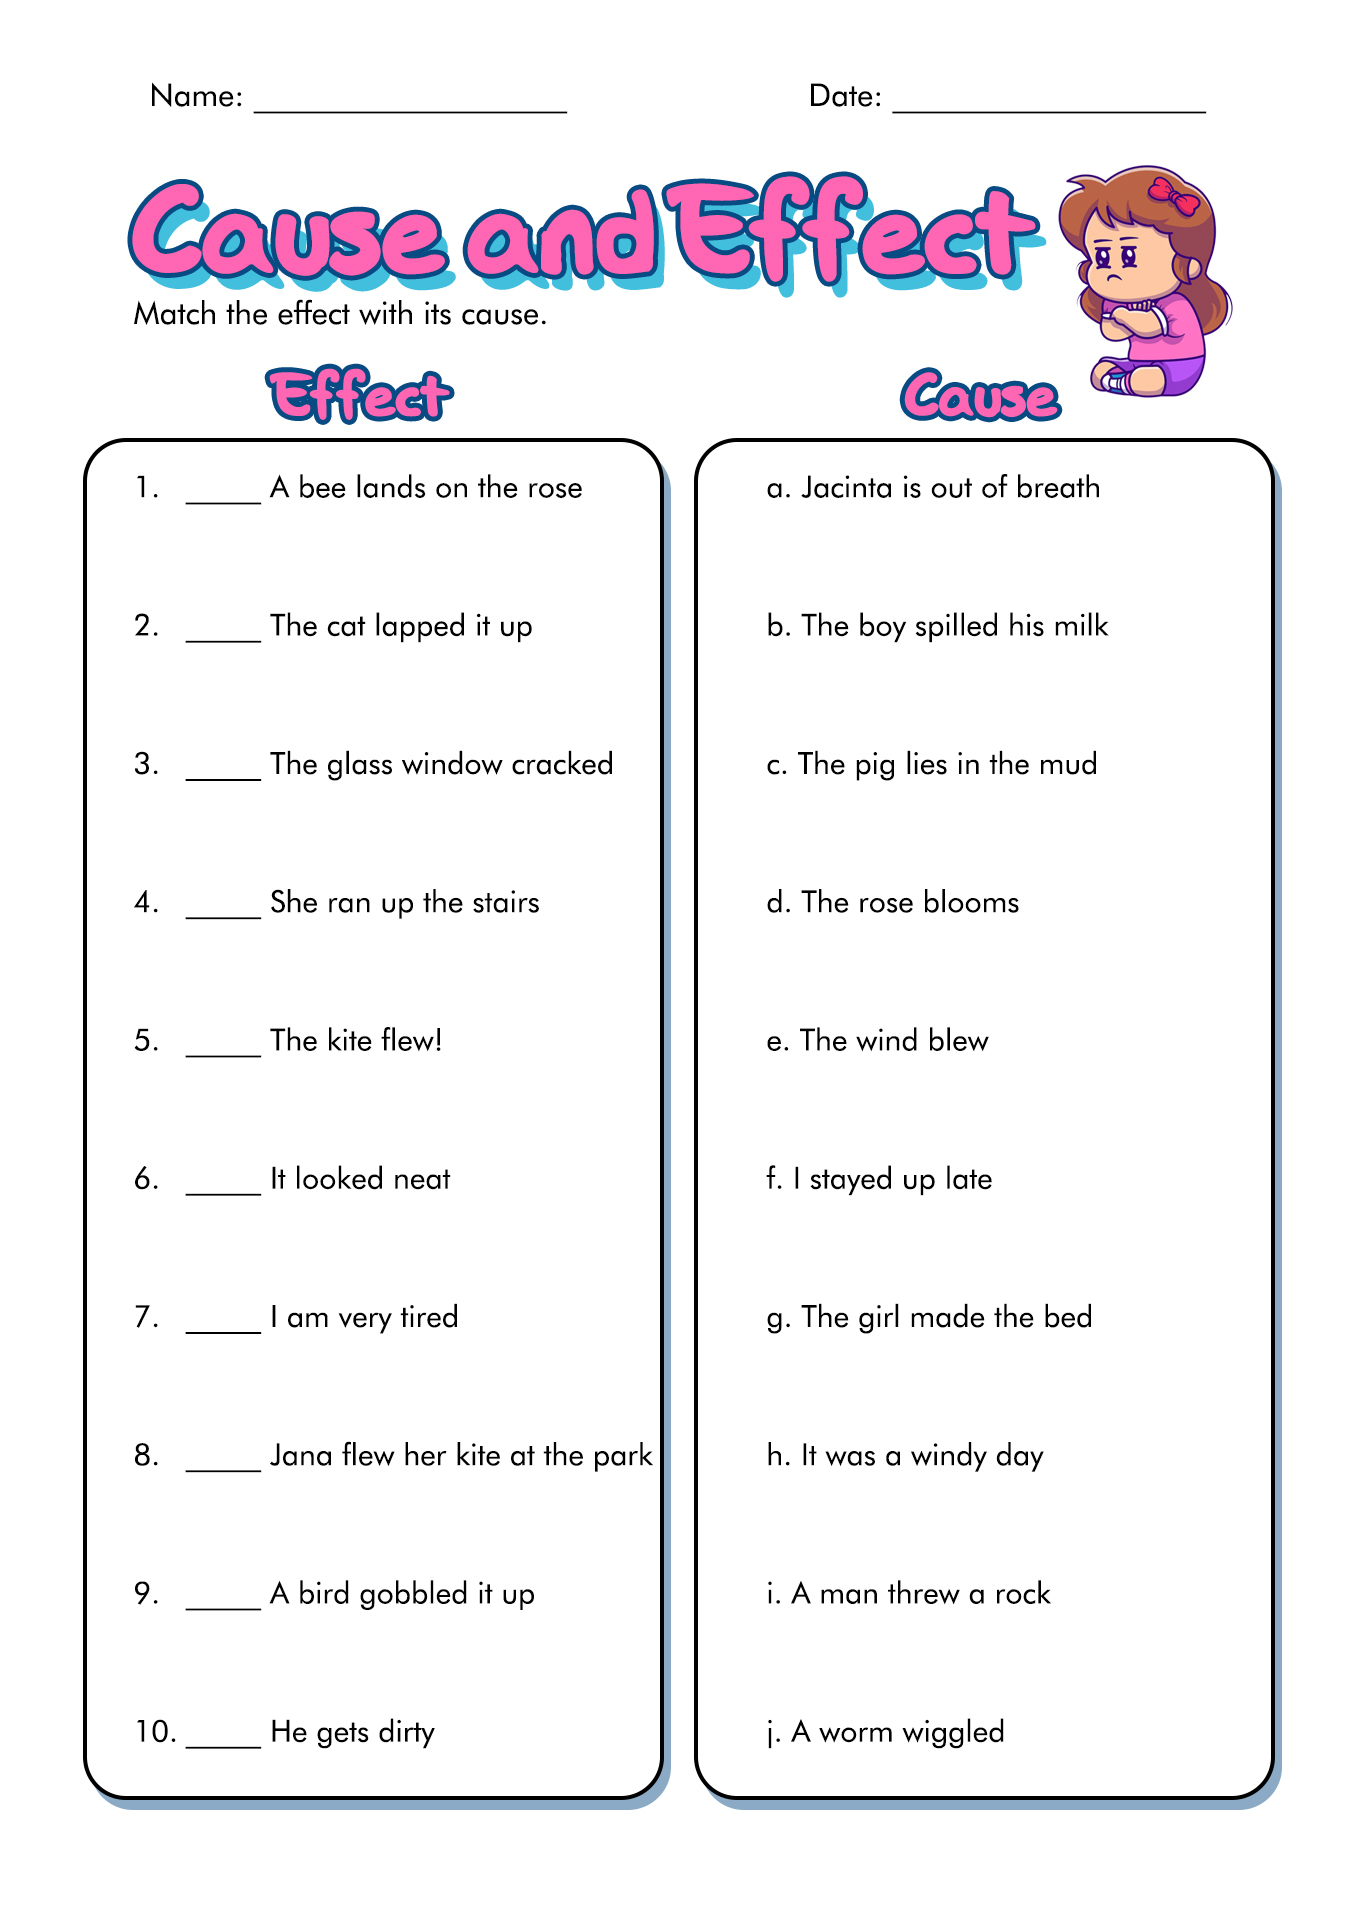 12-best-images-of-worksheets-middle-school-activity-guess-who-i-am-worksheet-types-of